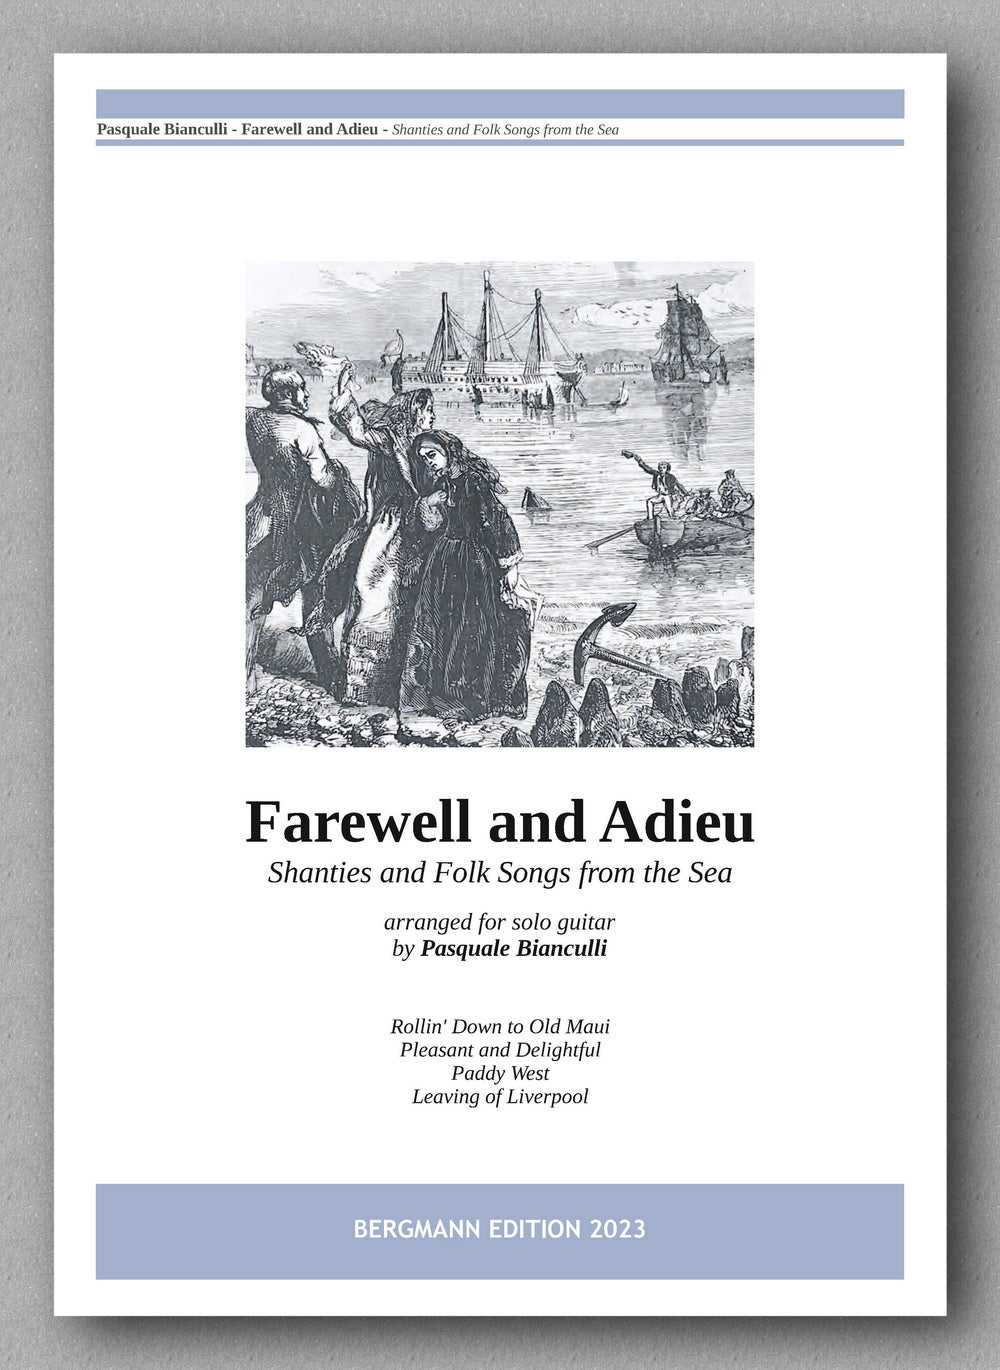 Pasquale Bianculli, Farewell and Adieu - preview of the cover